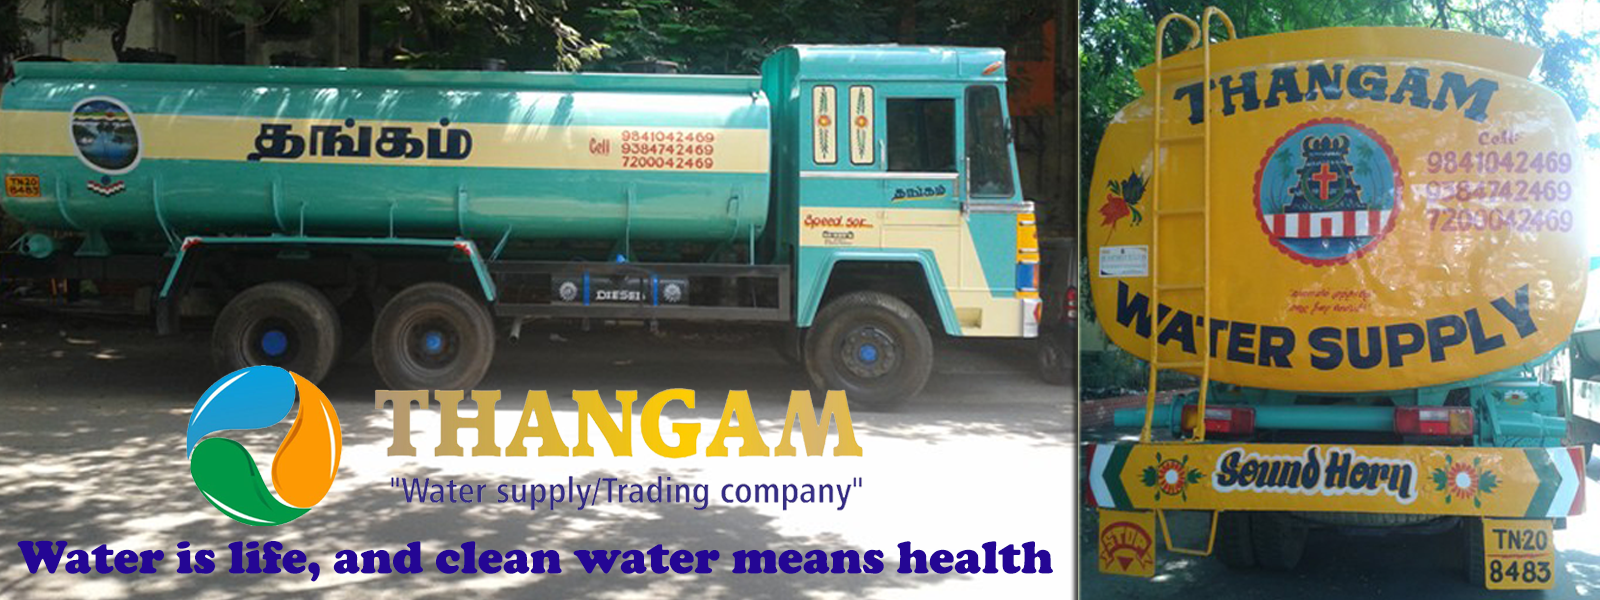 water suppliers in all over chennai area with fast and best quality of water.